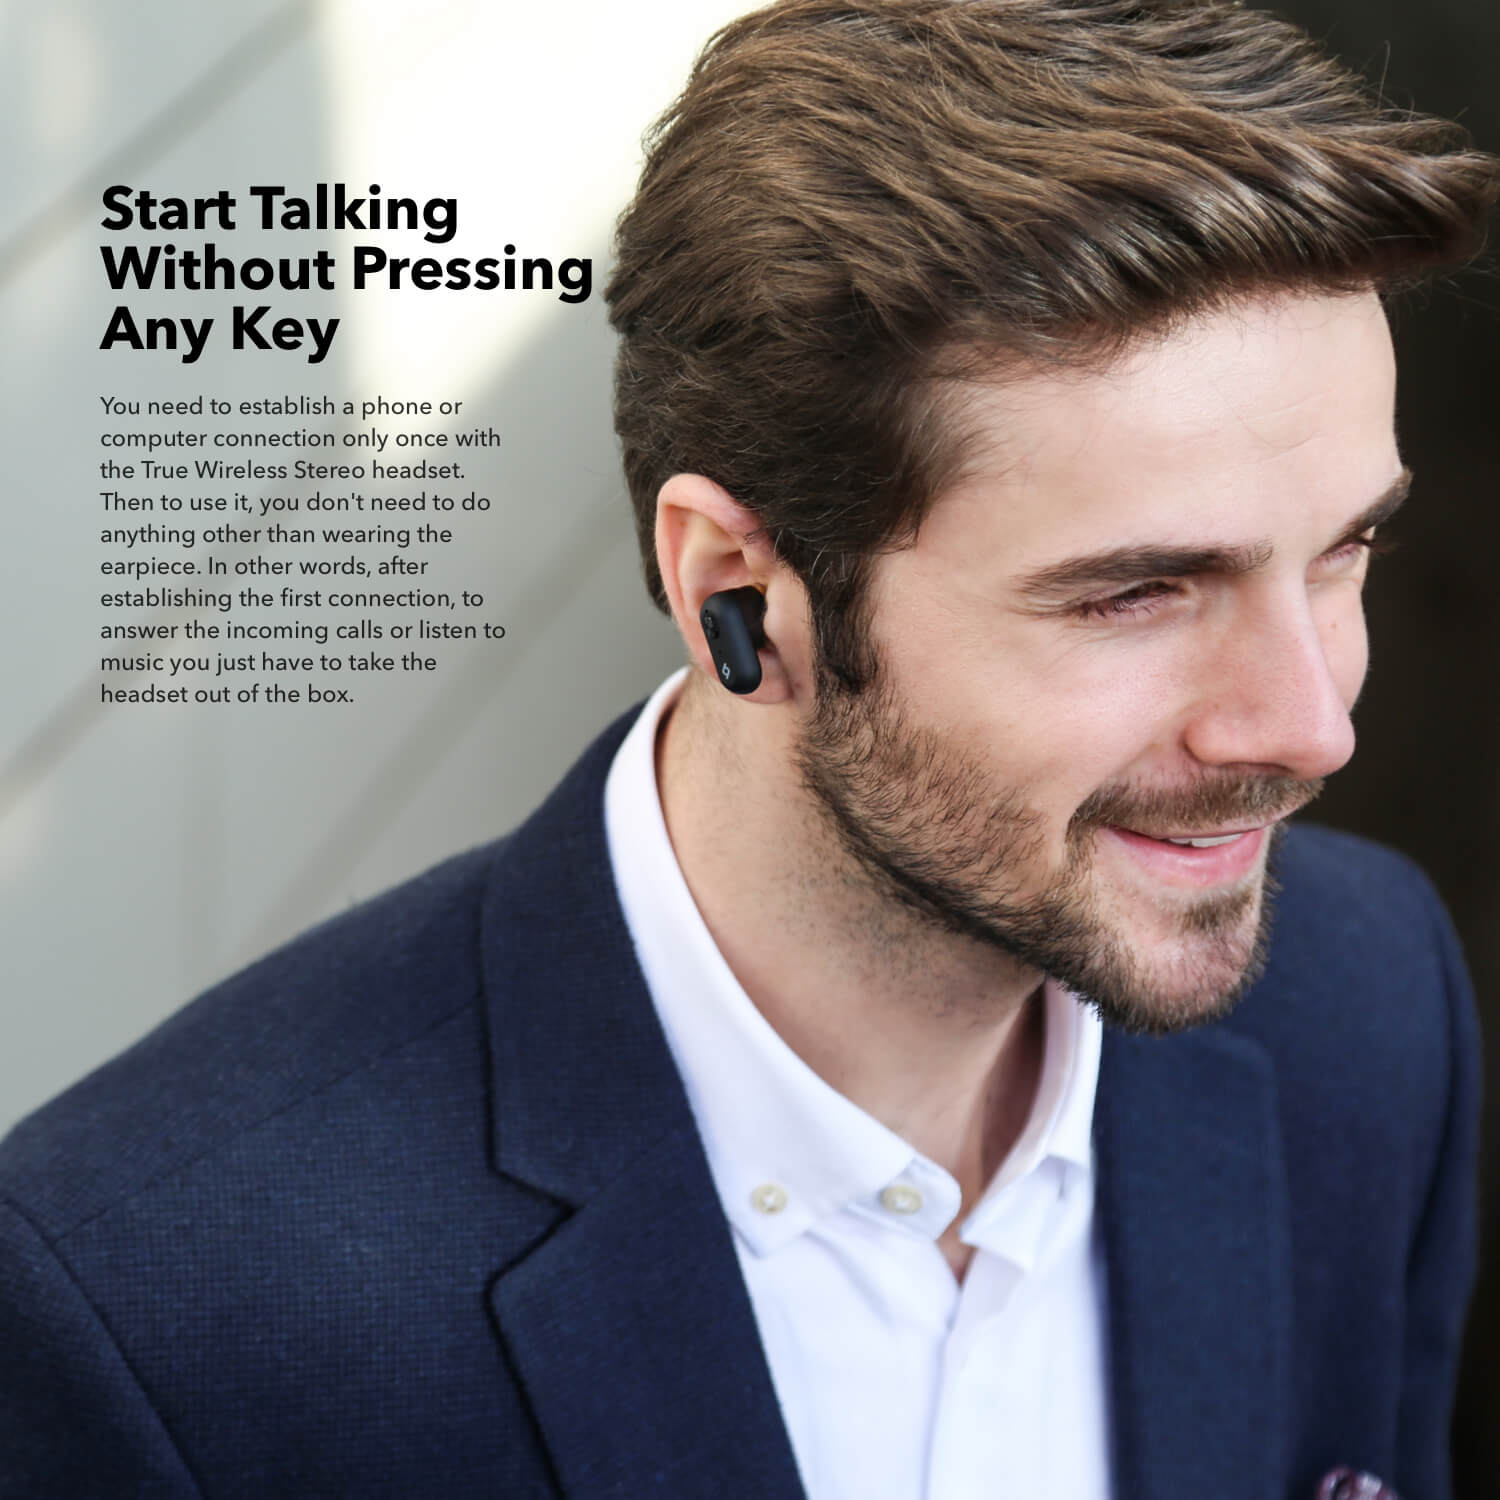 Start talking without pressing any key